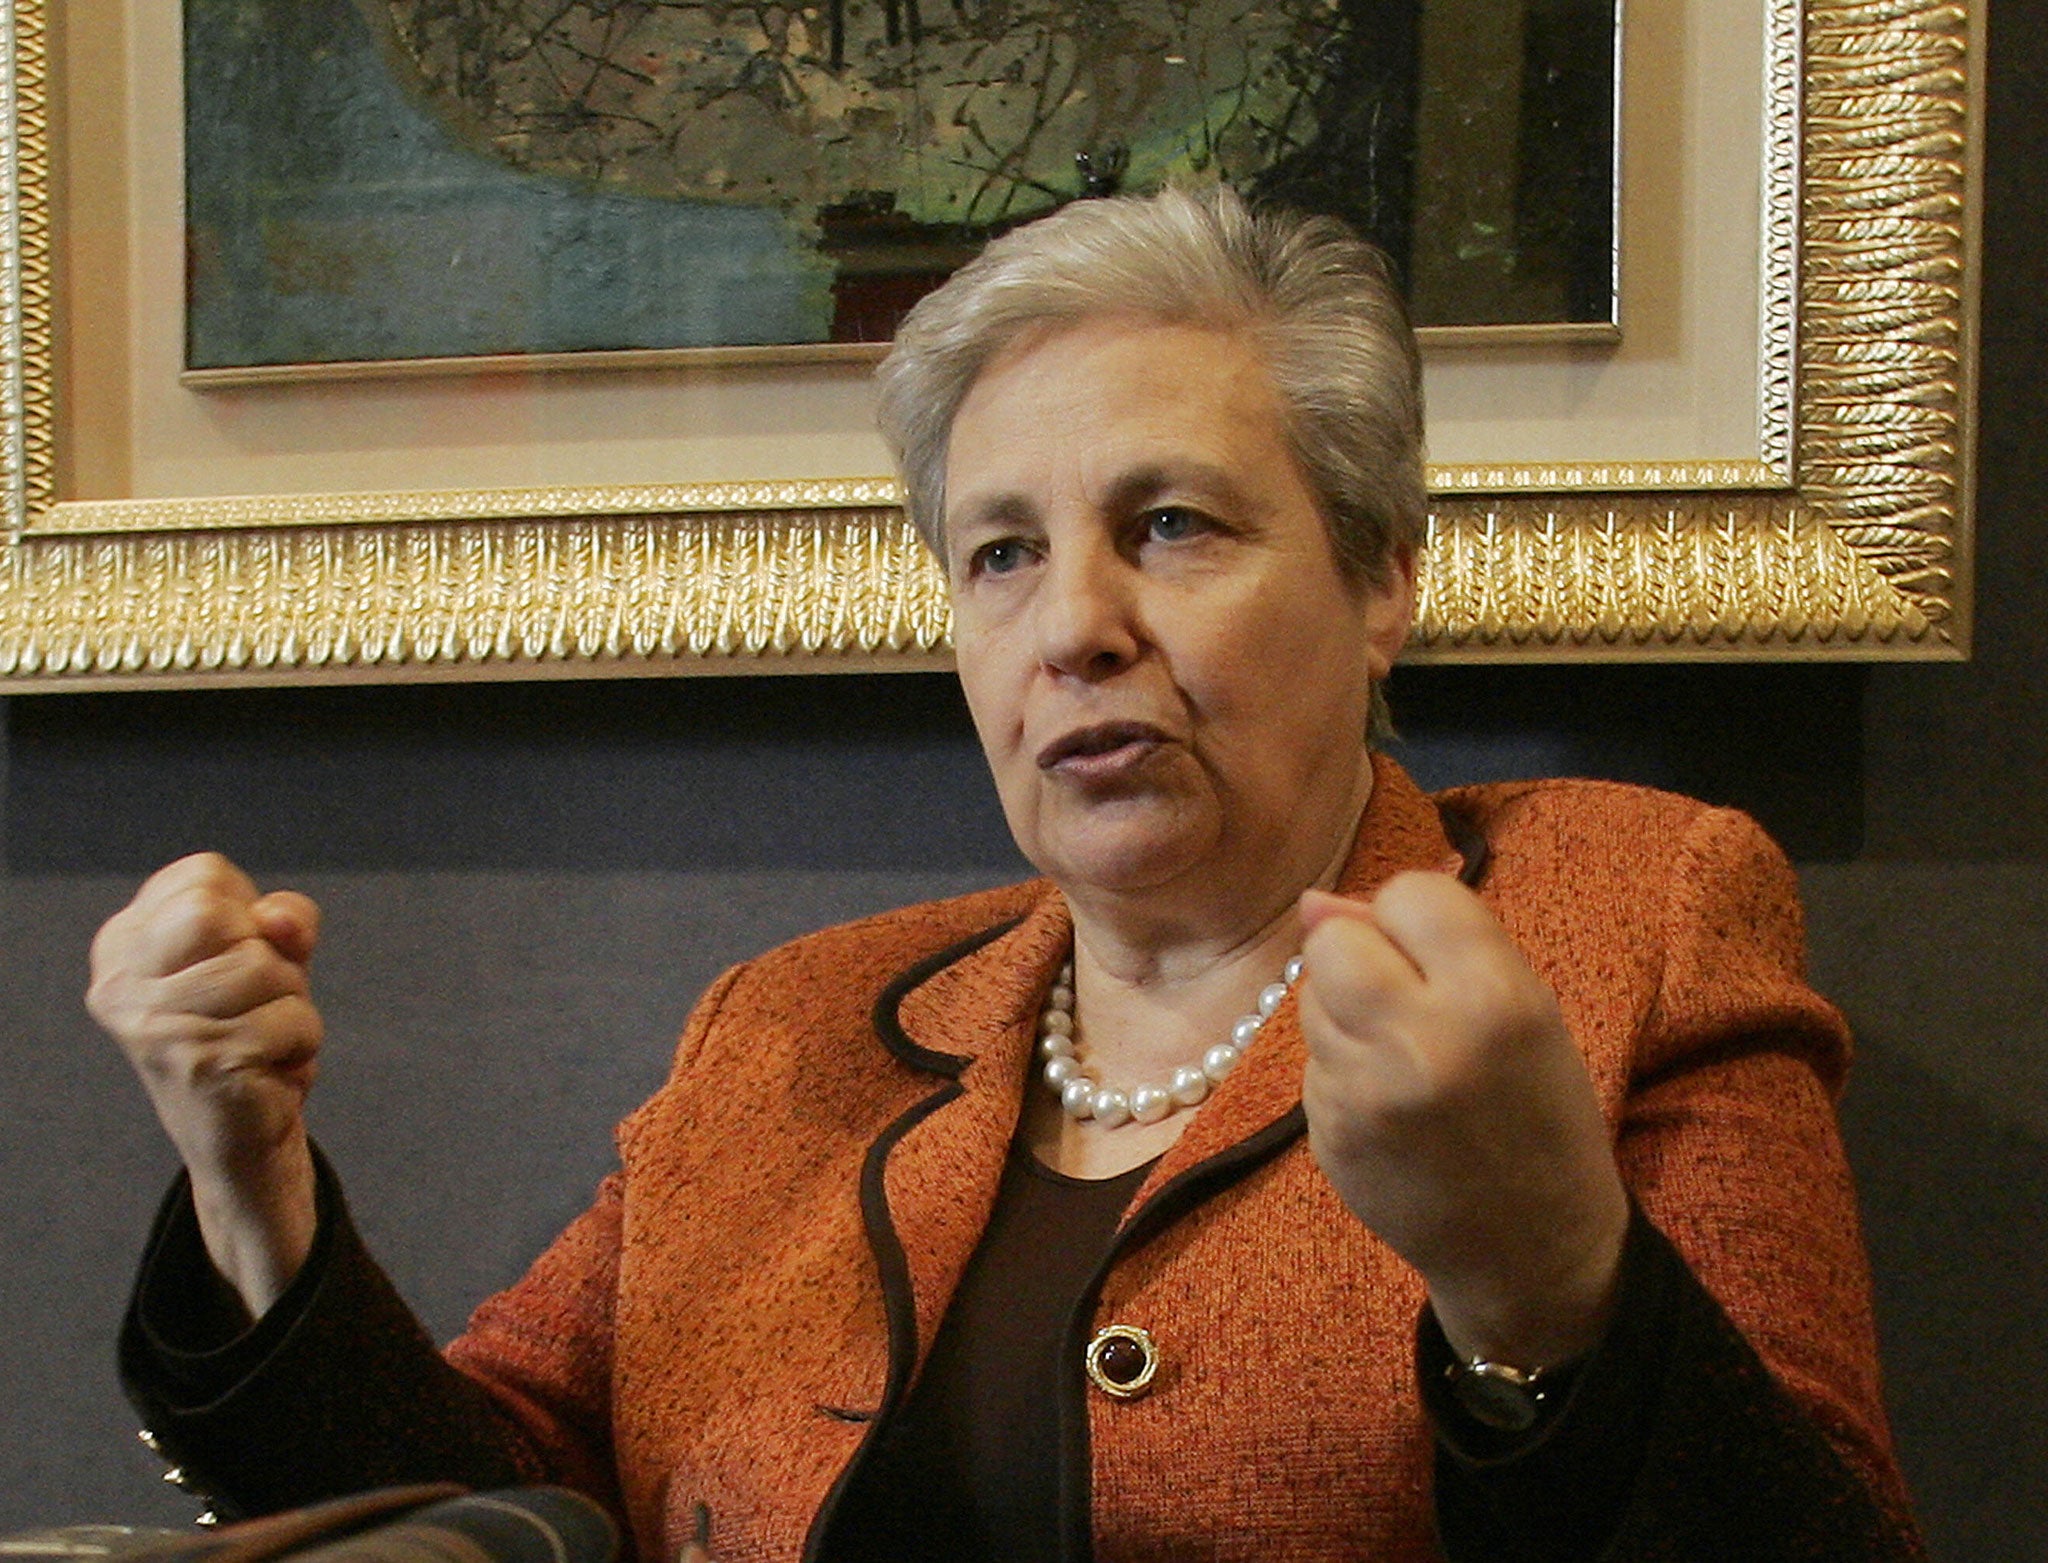 After the murder of her brother, a prosecuting magistrate, Borsellino became a defiant public critic of the mafiosi, notably through her work in the NGO Libera